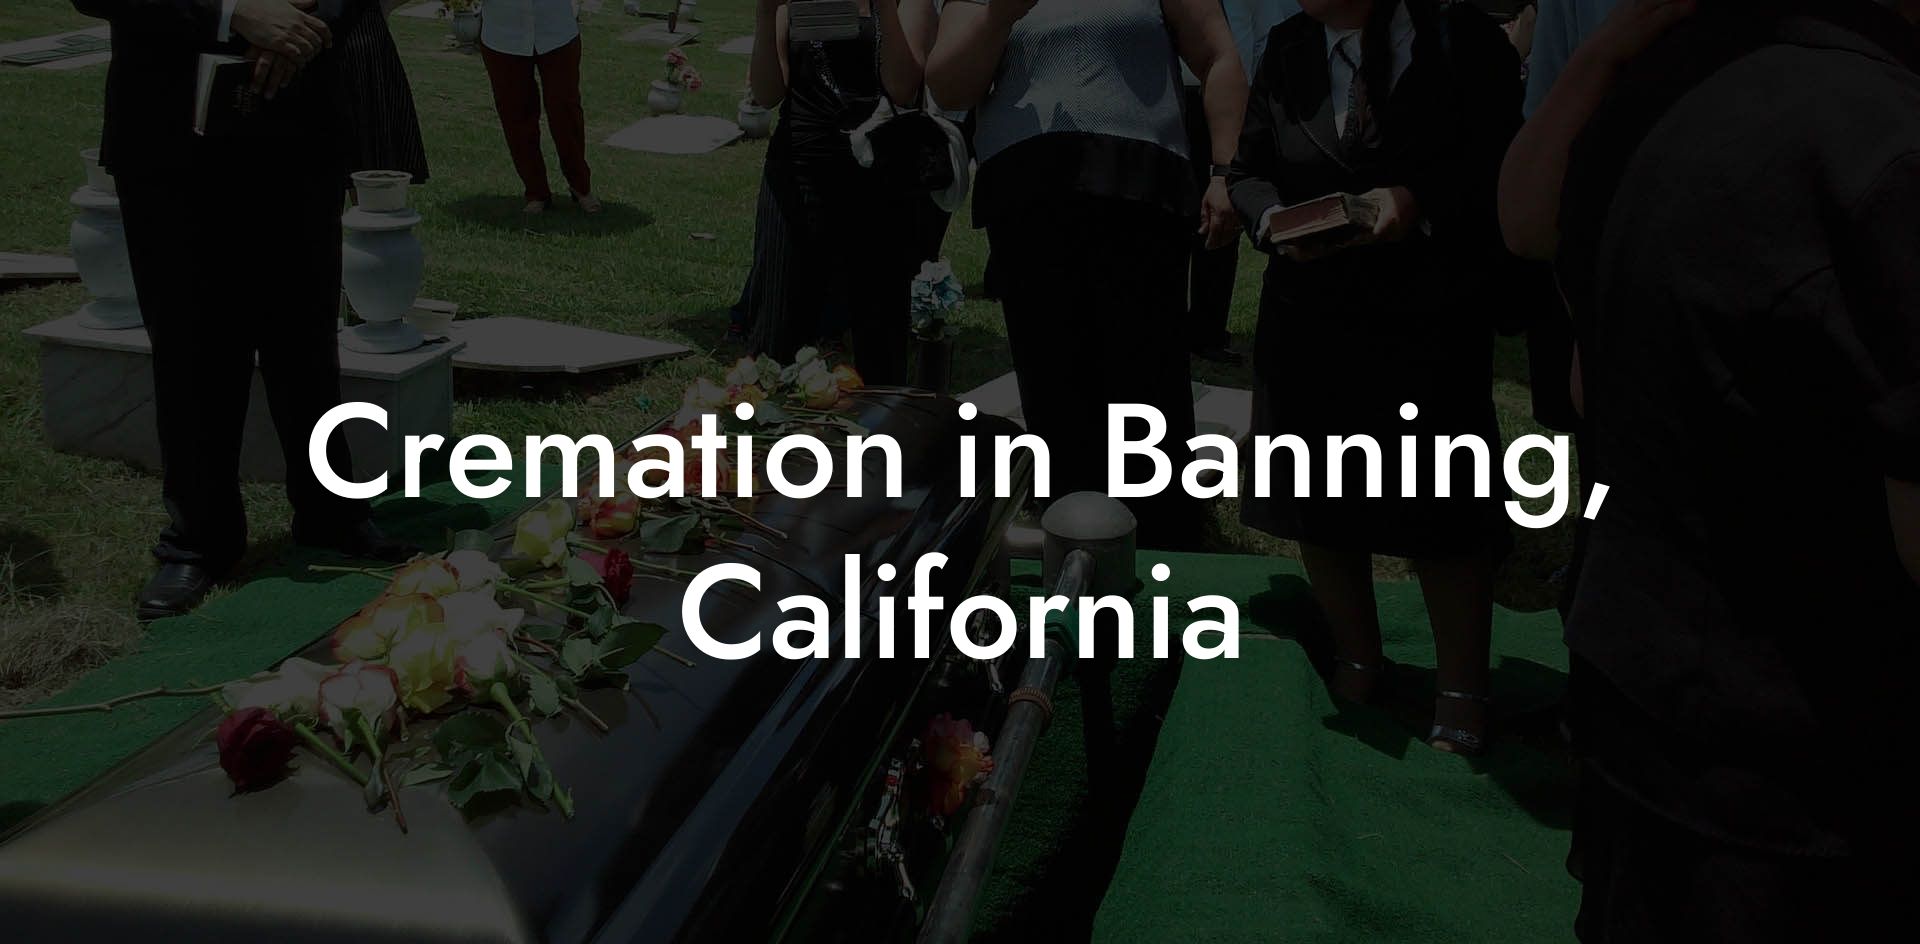 Cremation in Banning, California